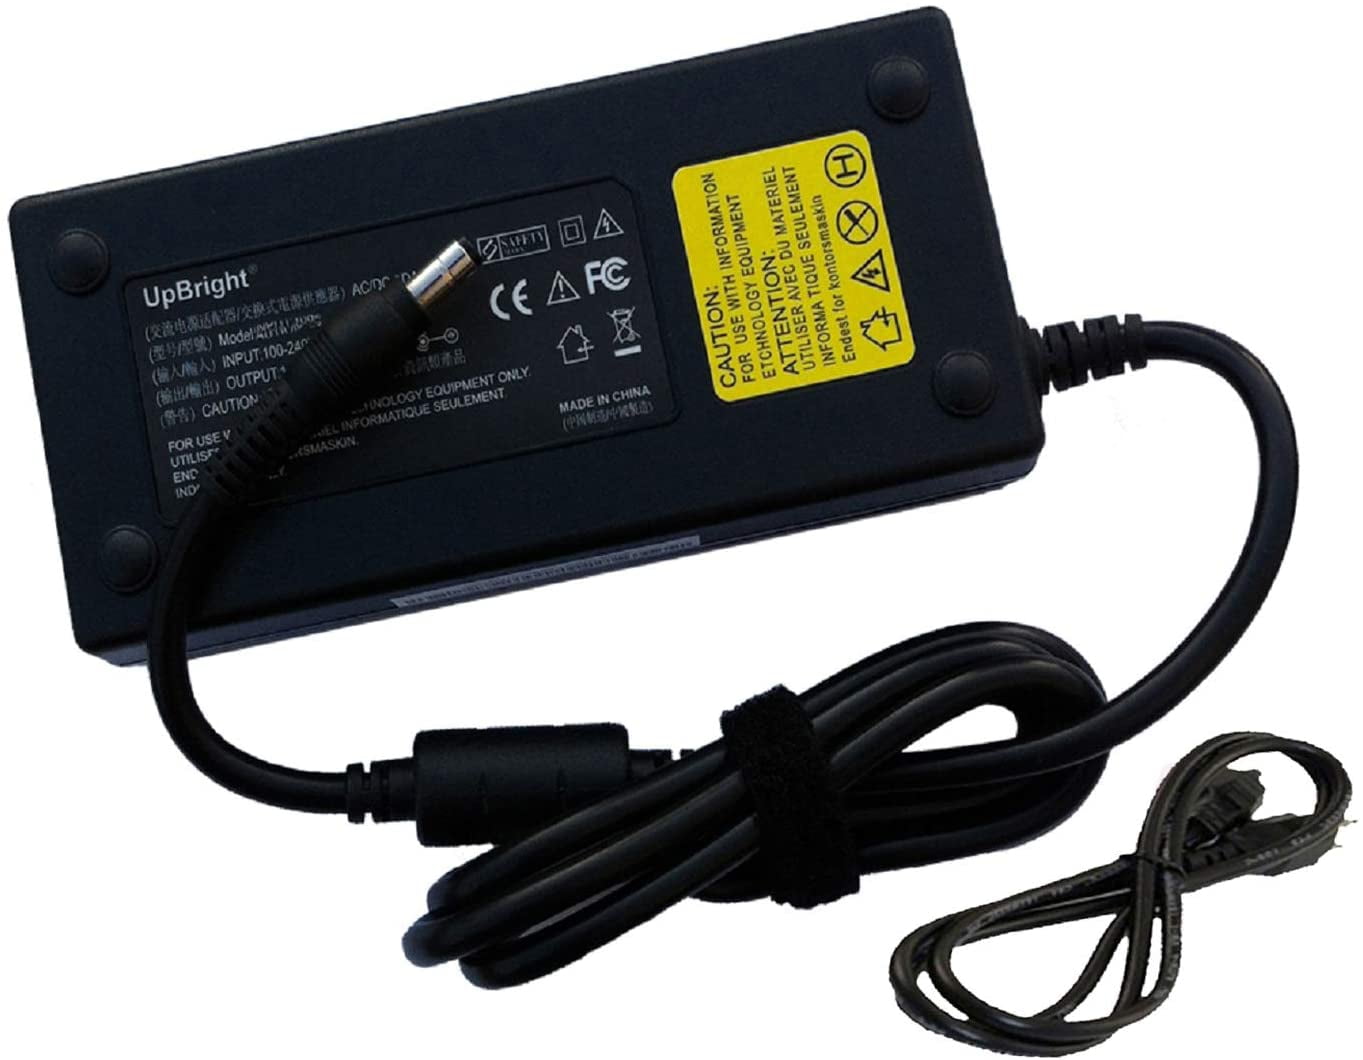 Old Stock for sale online Gepe Model 809002 Pro AC Adapter 